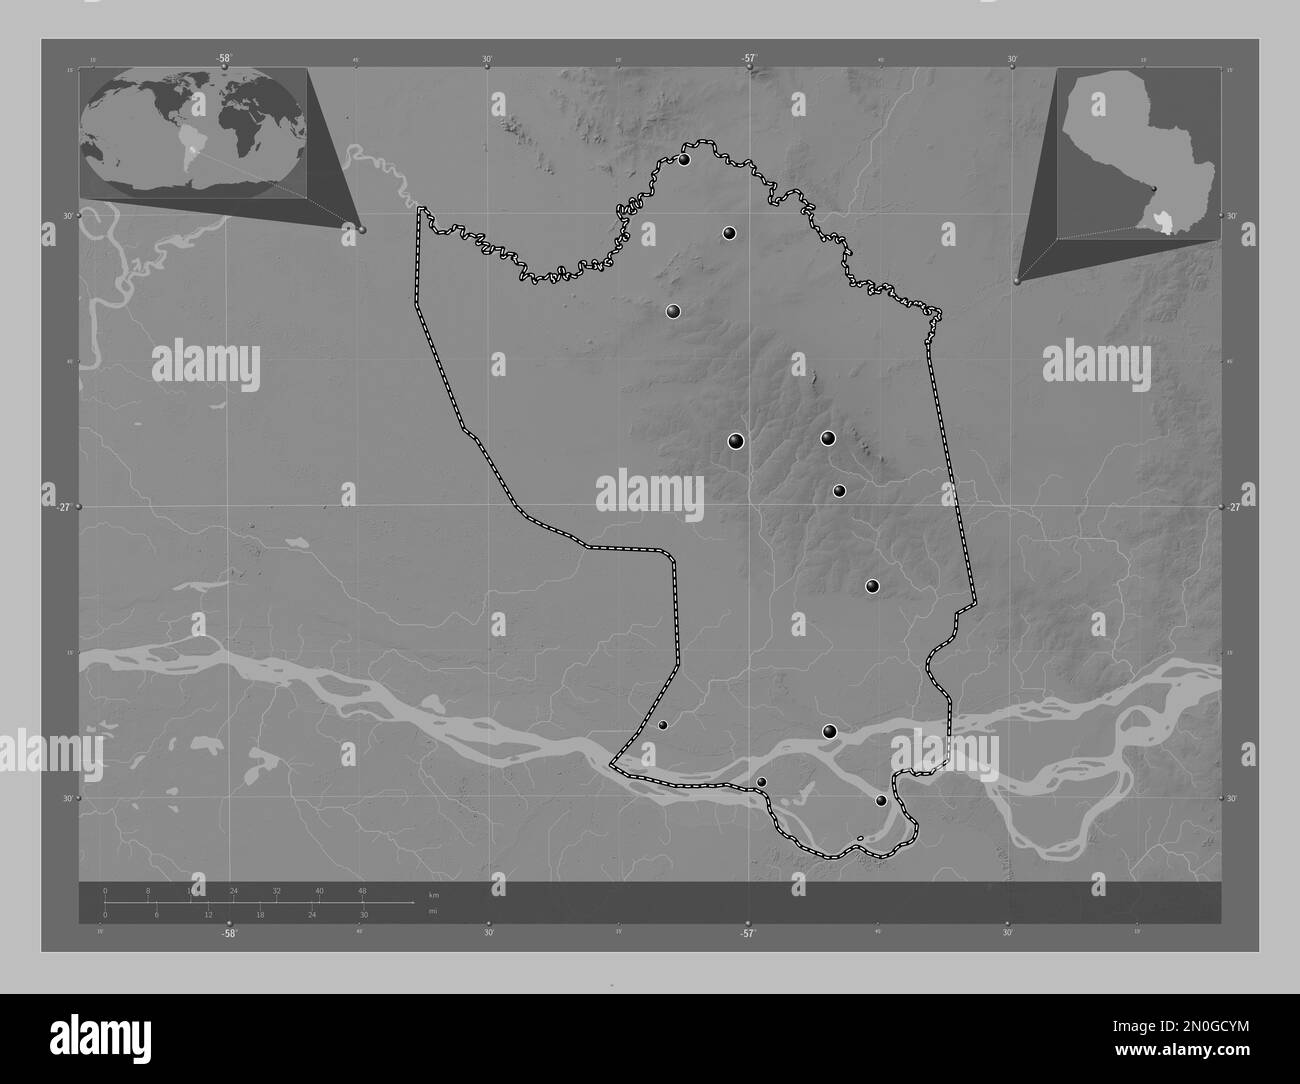 Misiones, department of Paraguay. Grayscale elevation map with lakes and rivers. Locations of major cities of the region. Corner auxiliary location ma Stock Photo